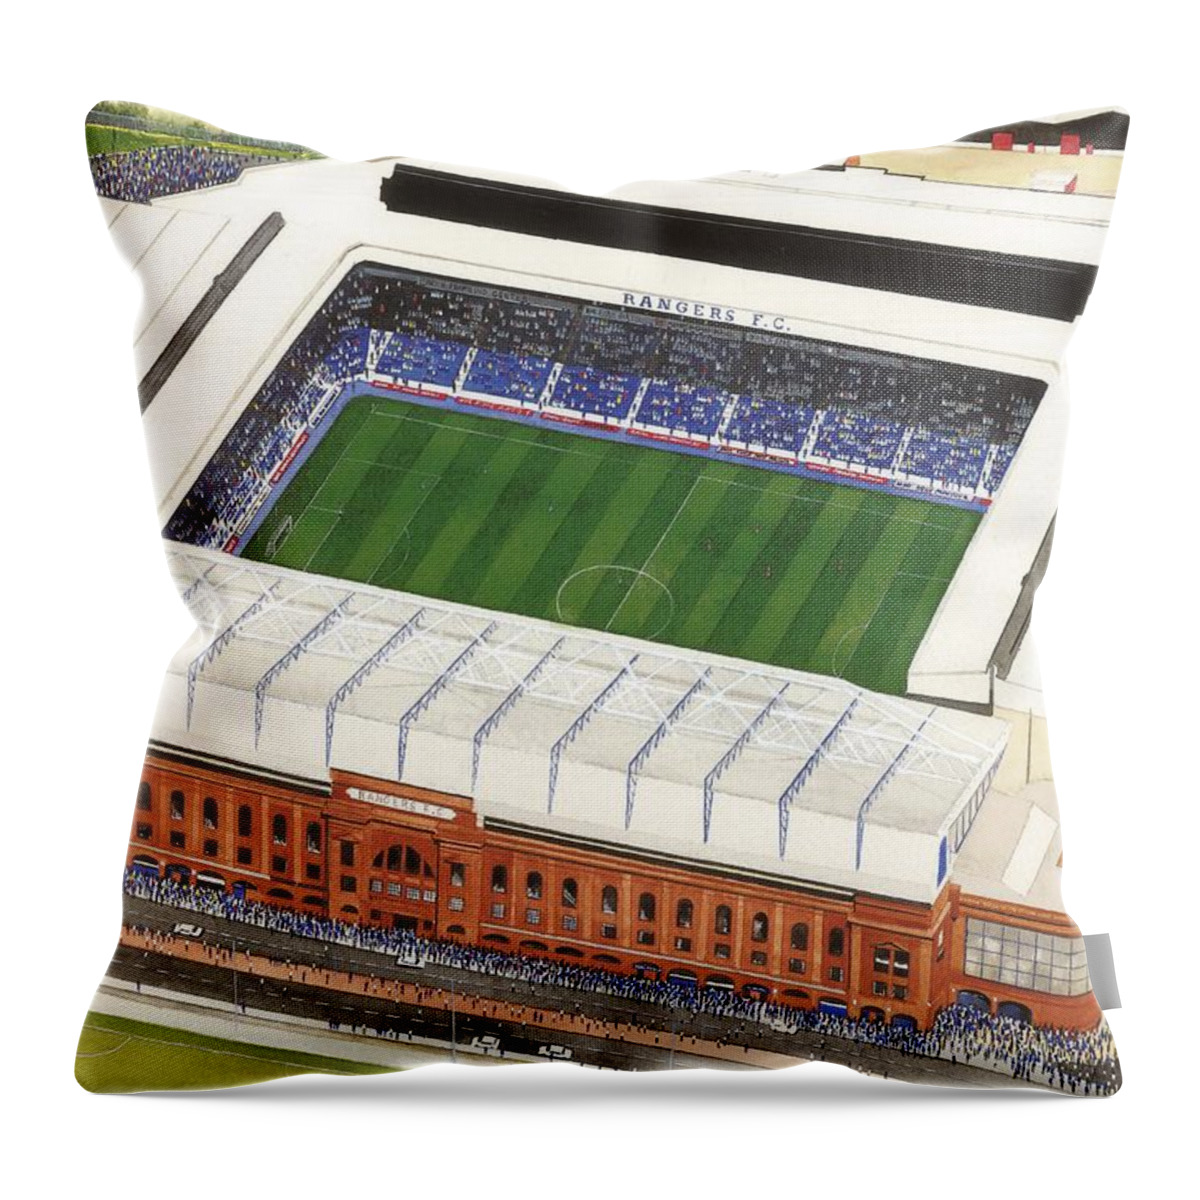 Glasgow Throw Pillow featuring the painting Ibrox Stadium by Kevin Fletcher